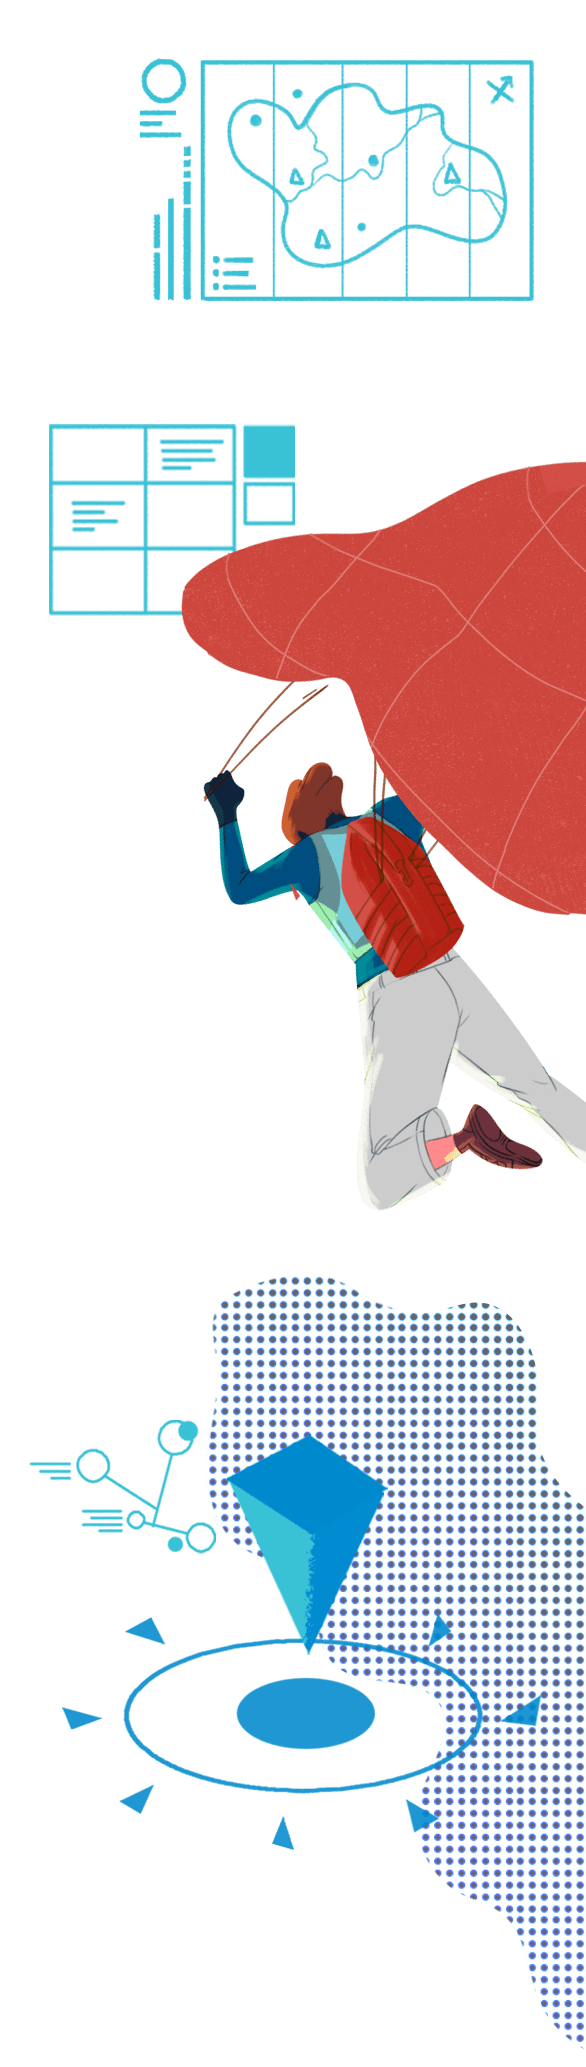 drawing of a parachuter in a geometric psychoscape